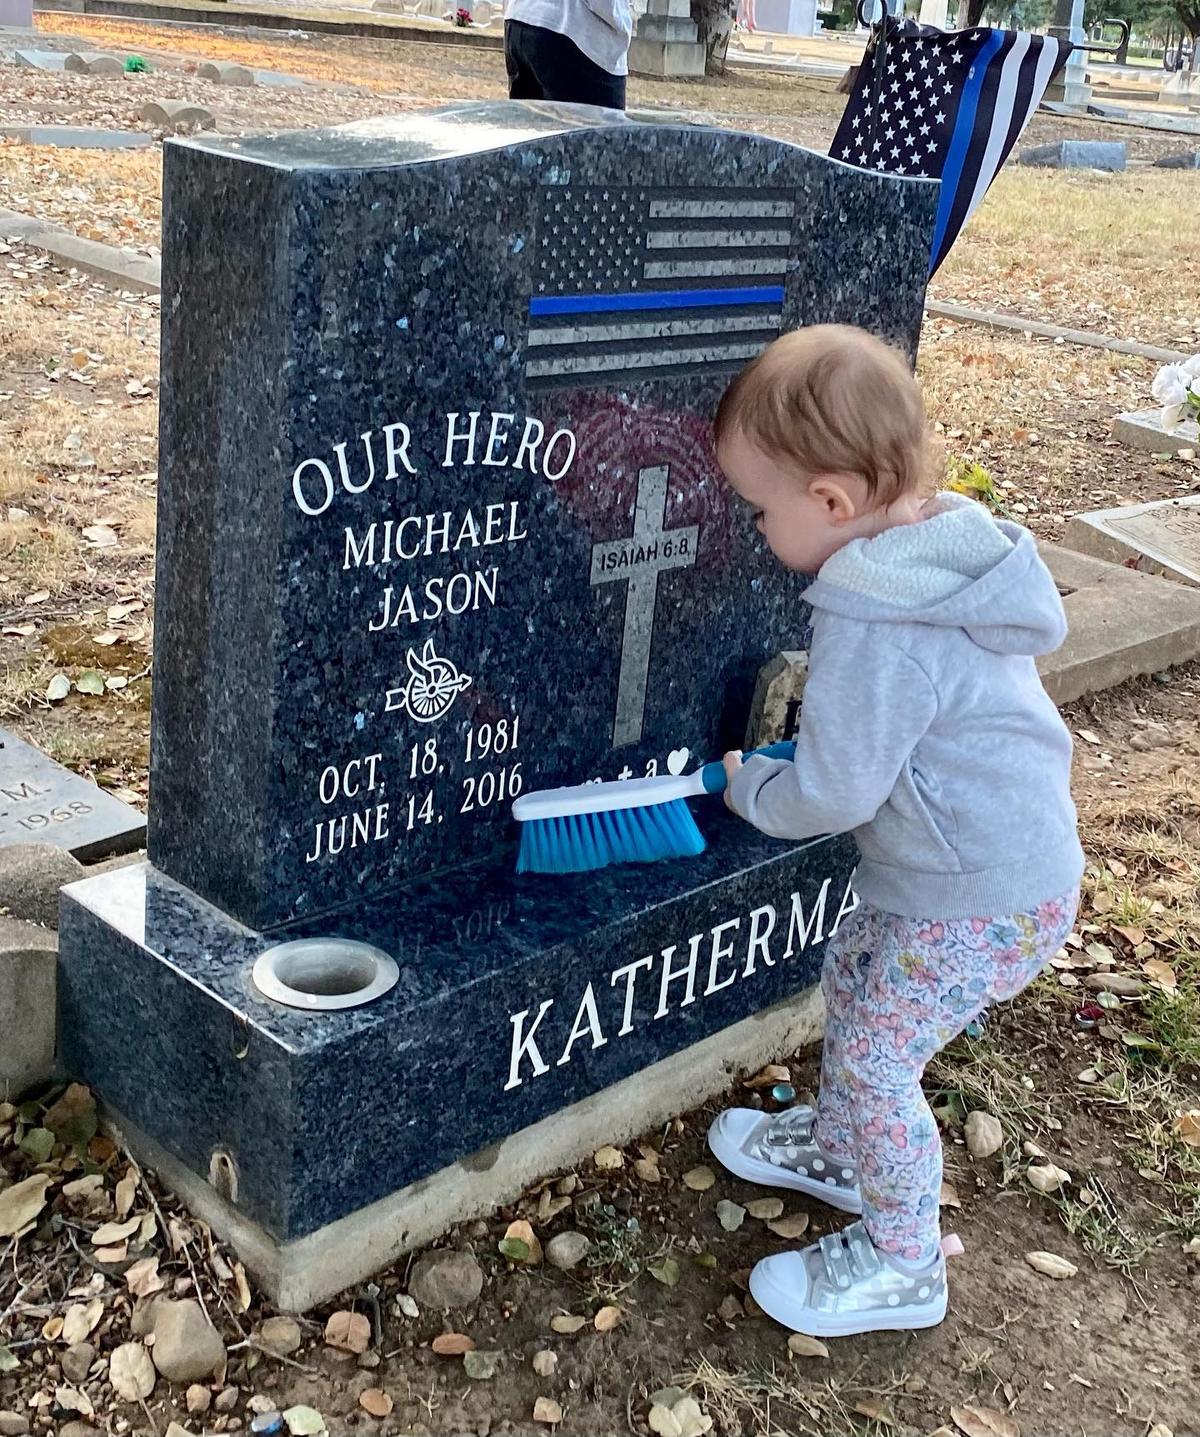 David and April's baby daughter helping clean Mike's grave. (Courtesy of <a href="https://www.instagram.com/beautyforourashesblog/">April Katherman-Redgrave</a>)